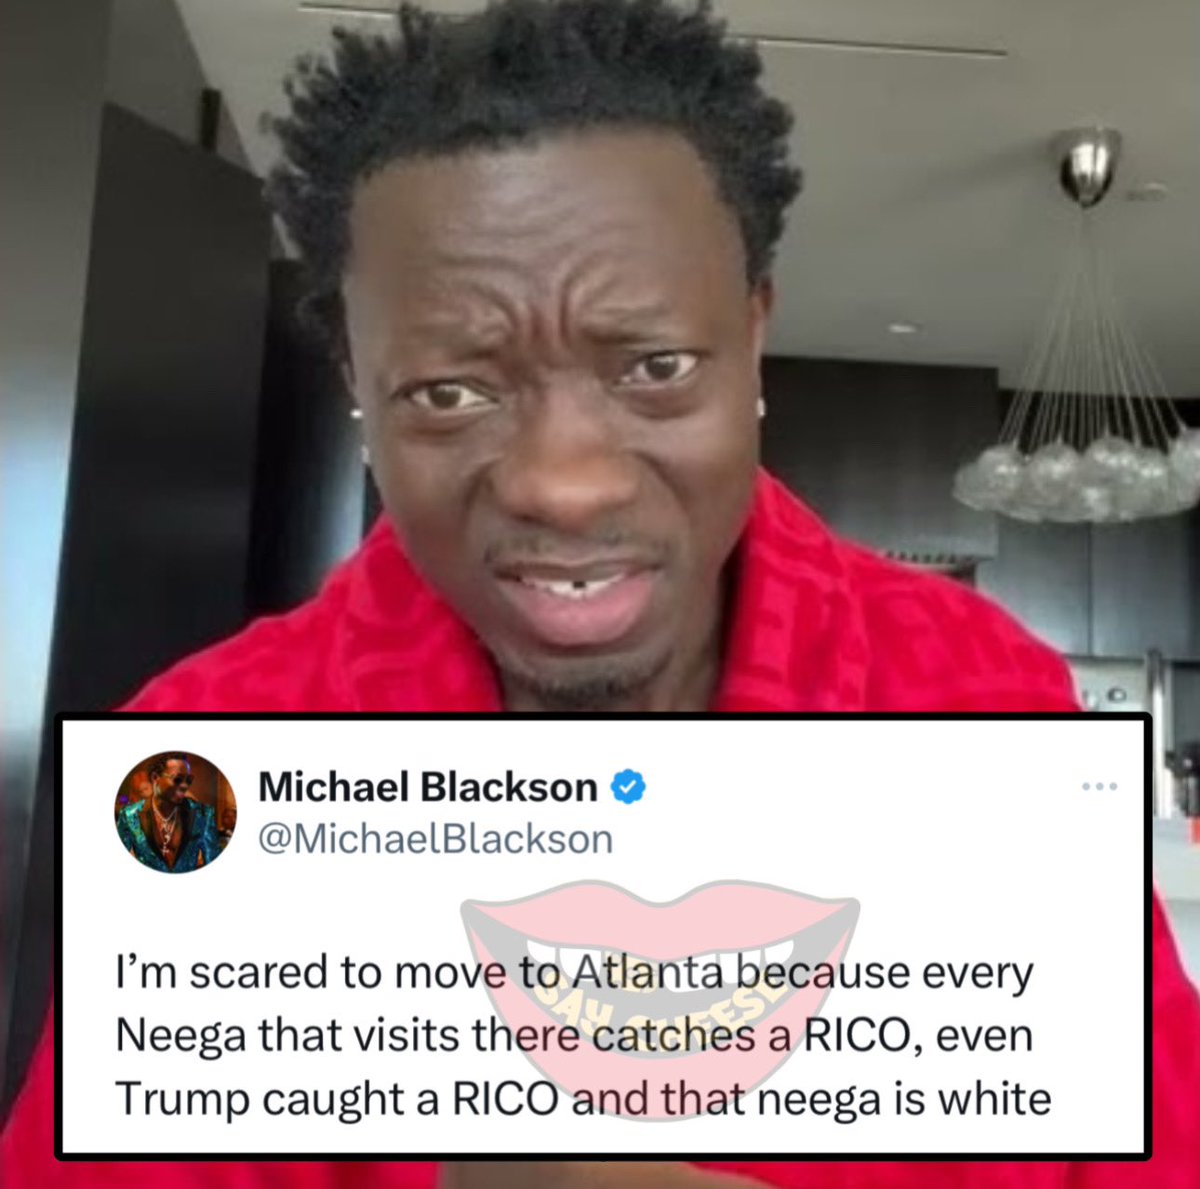 Michael Blackson explains why he is scared to move to Atlanta